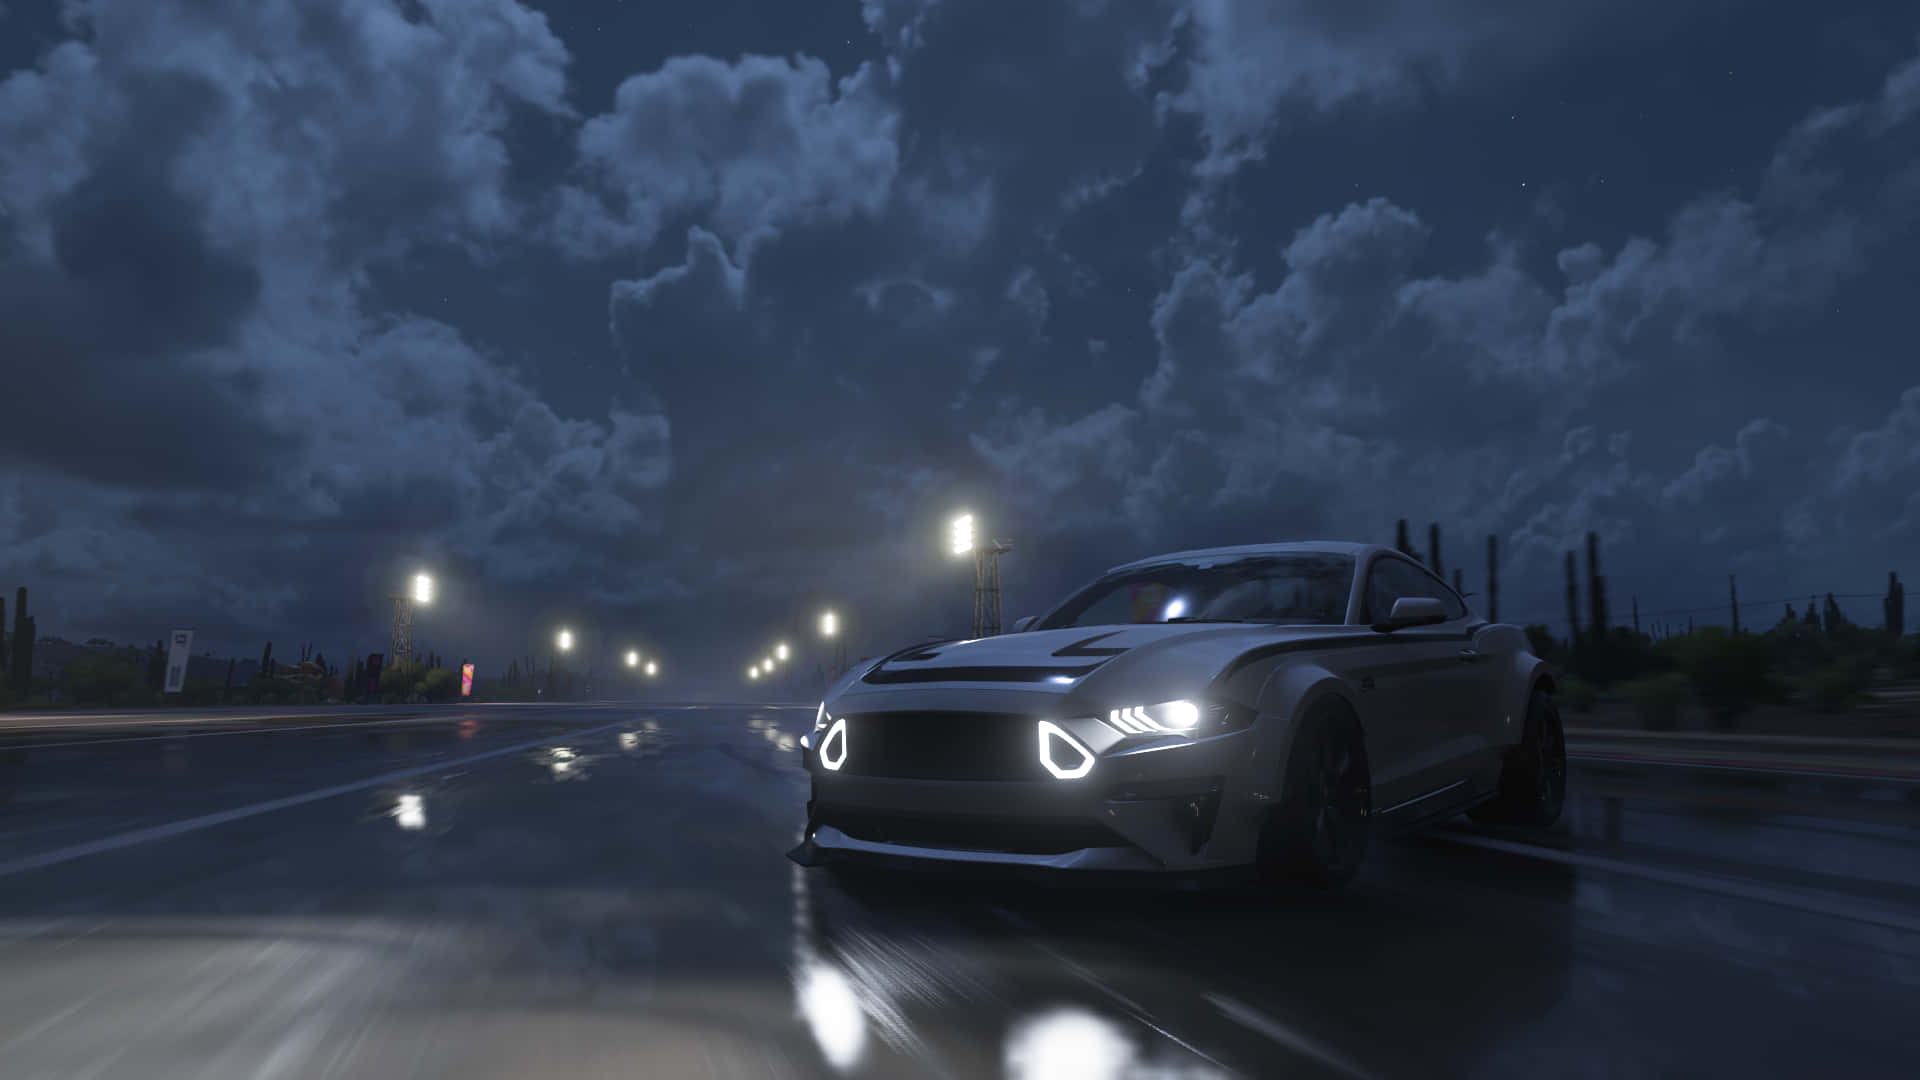 Ford Mustang Sports Car In The Dark Wallpaper